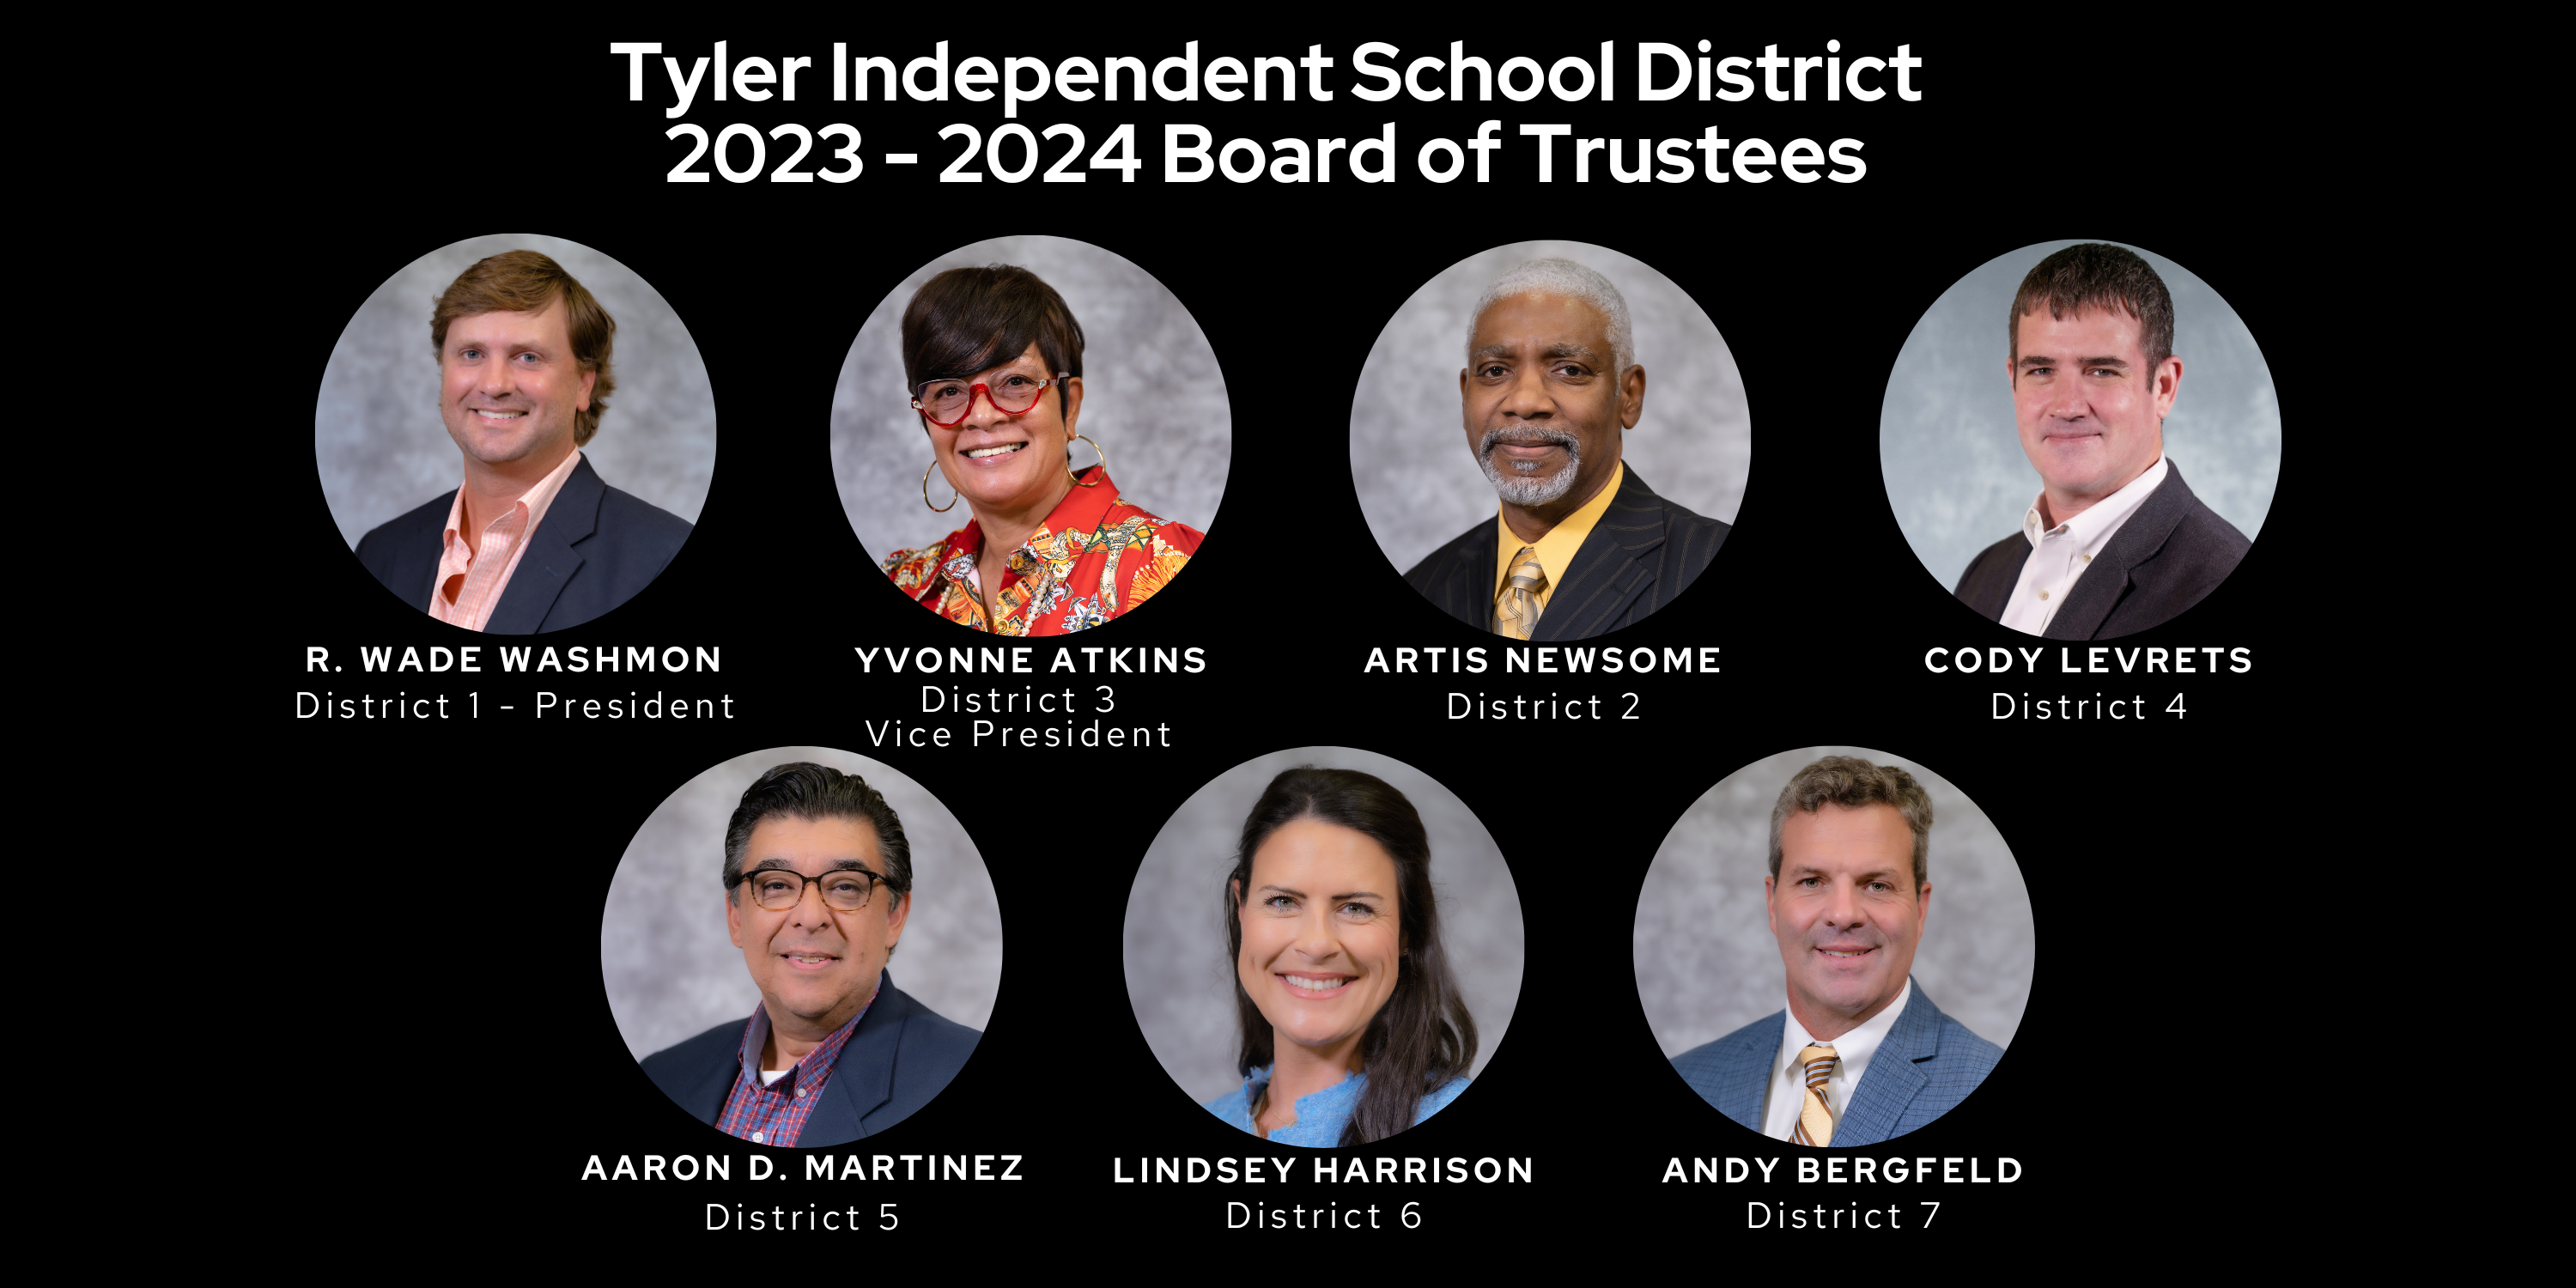 Tyler Independent School District 2021-2022 Board of Trustees. R. Wade Washmon District 1 - President, Aaron Martinez District 5 – Vice President, Artis Newsome District 2, Yvonne Atkins District 3, Dr. Patricia Nation District 4, Lindsey Harrison District 6,   Andy Bergfeld District 7